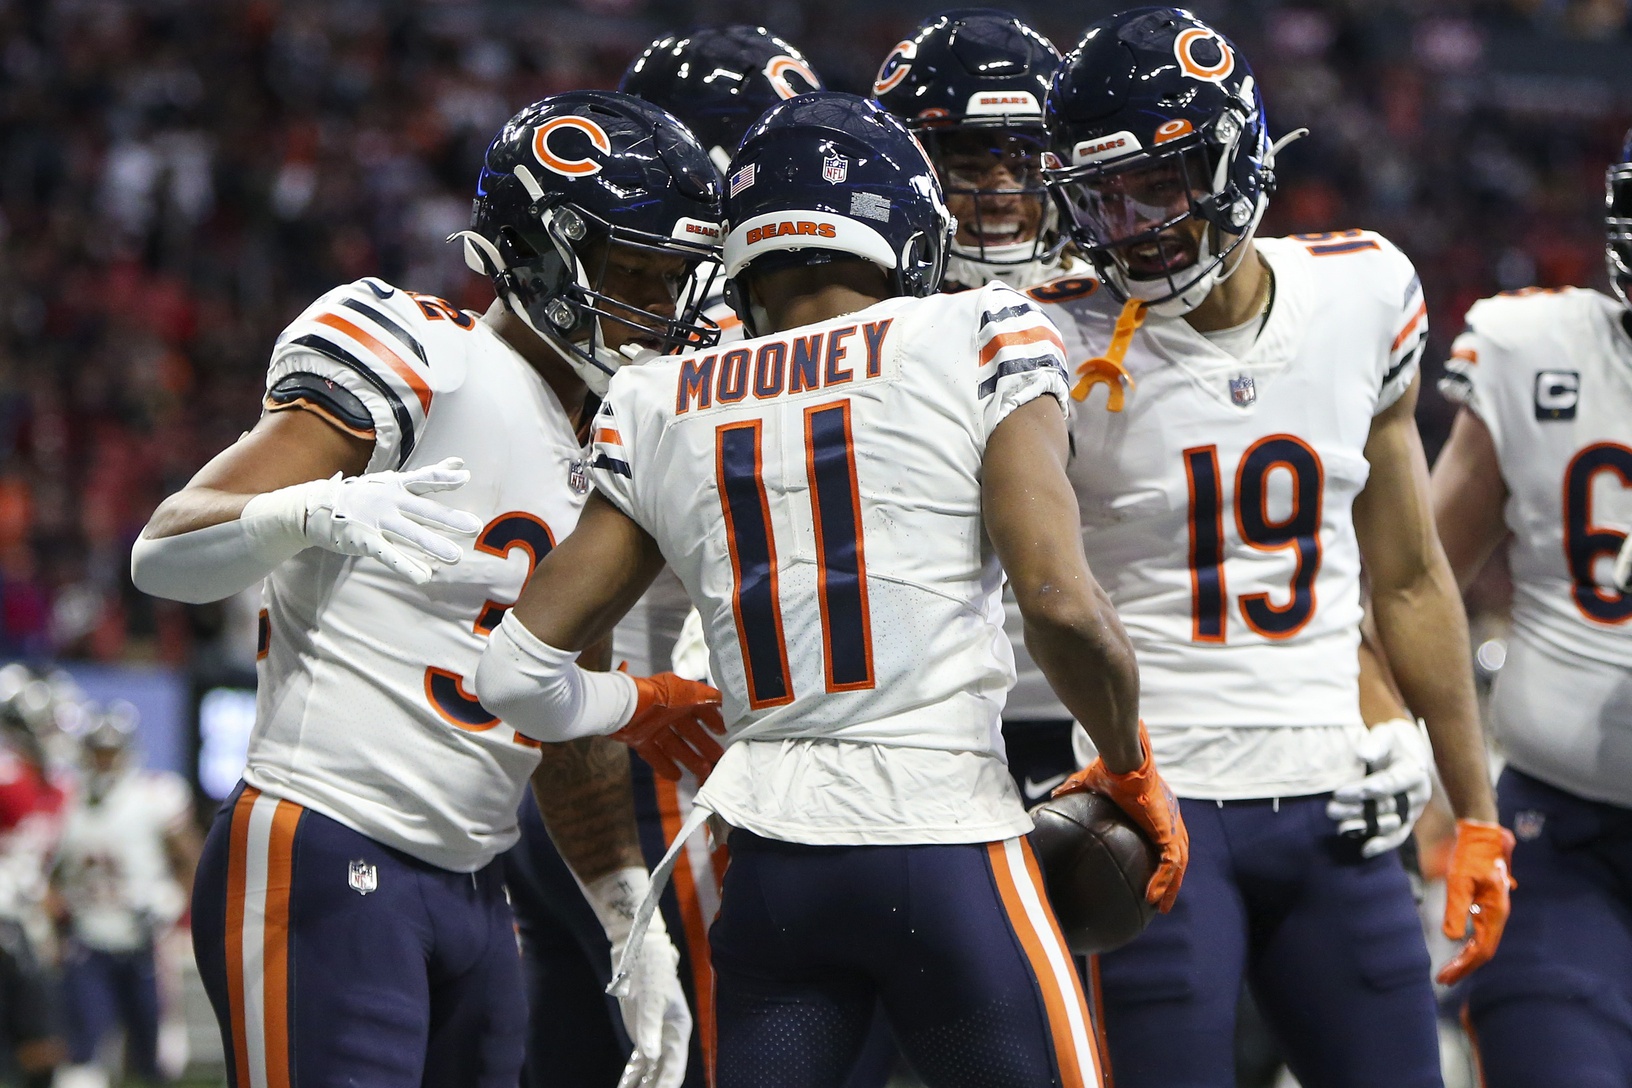 Chicago Bears wide receiver Darnell Mooney (11) celebrates with teammates after a touchdown catch against the Atlanta Falcons in the first quarter at Mercedes-Benz Stadium.